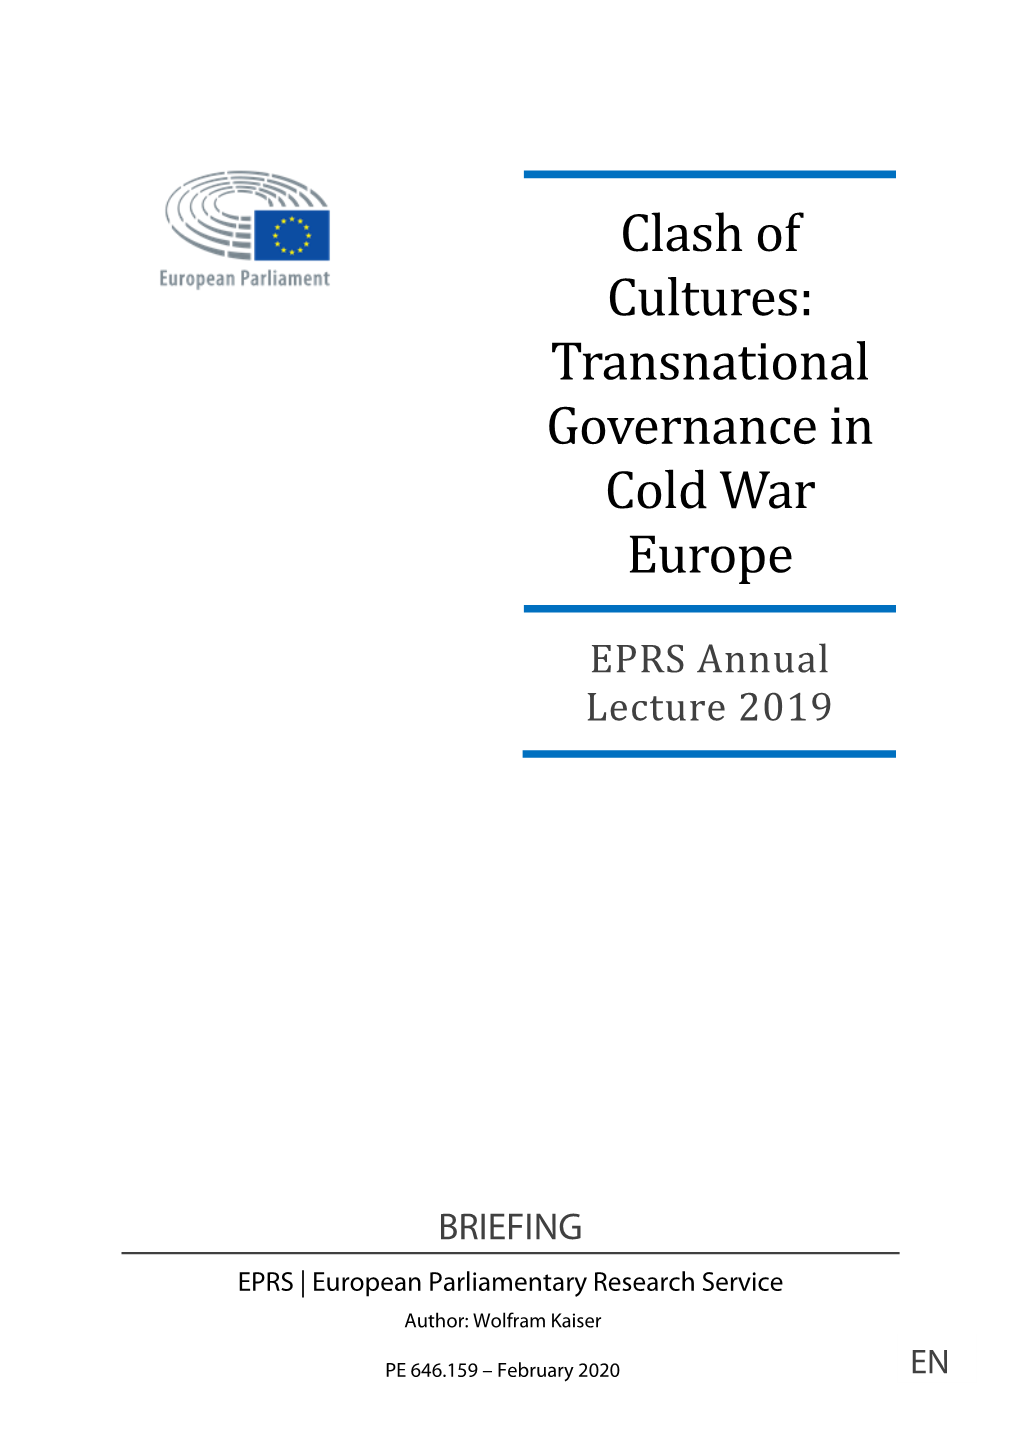 Transnational Governance in Cold War Europe